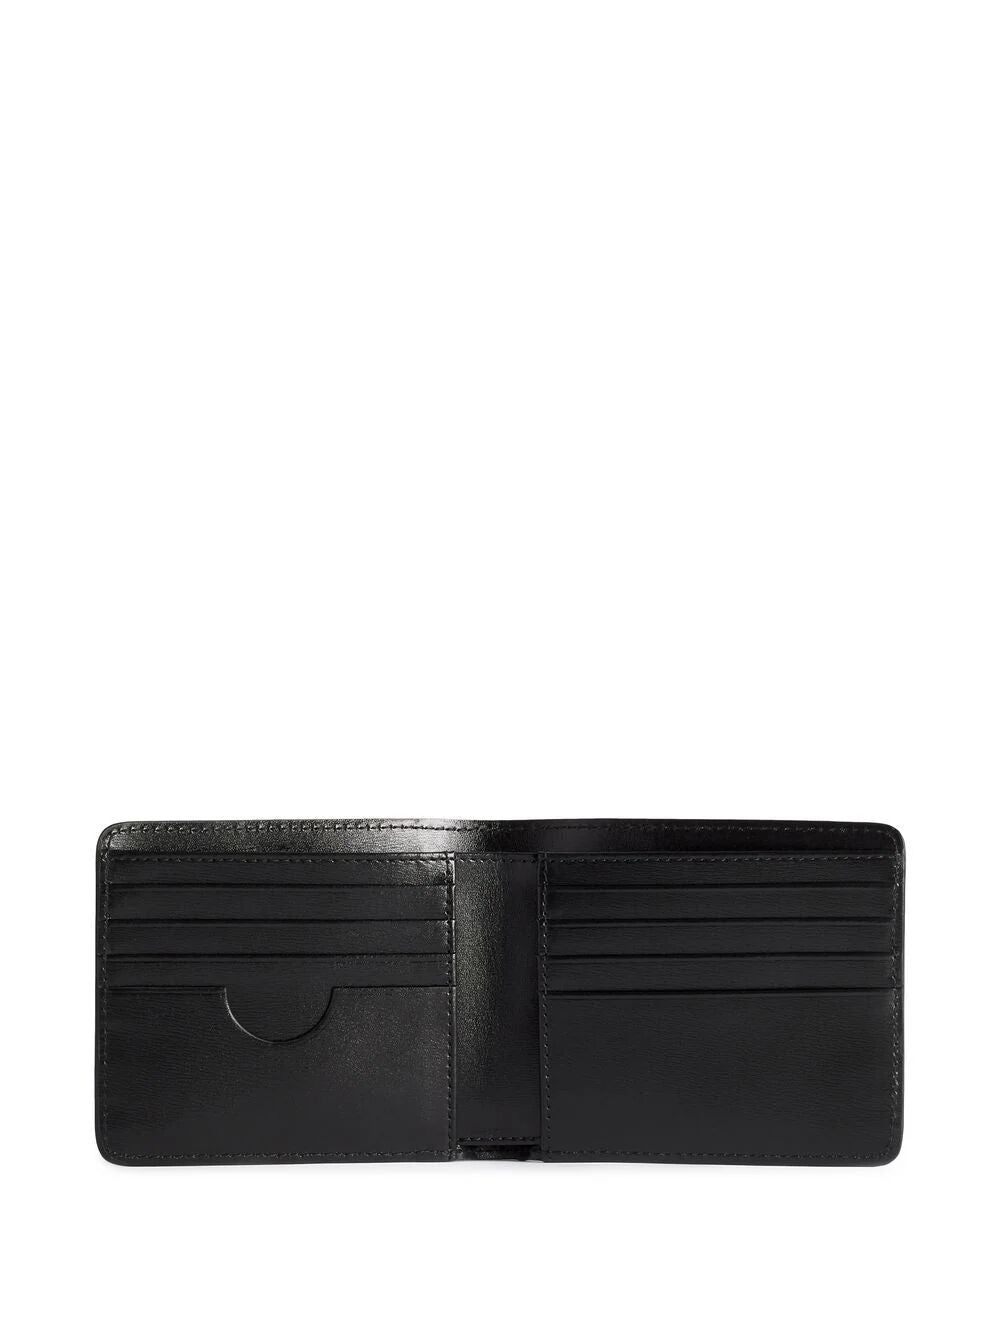 Adc Folded Wallet